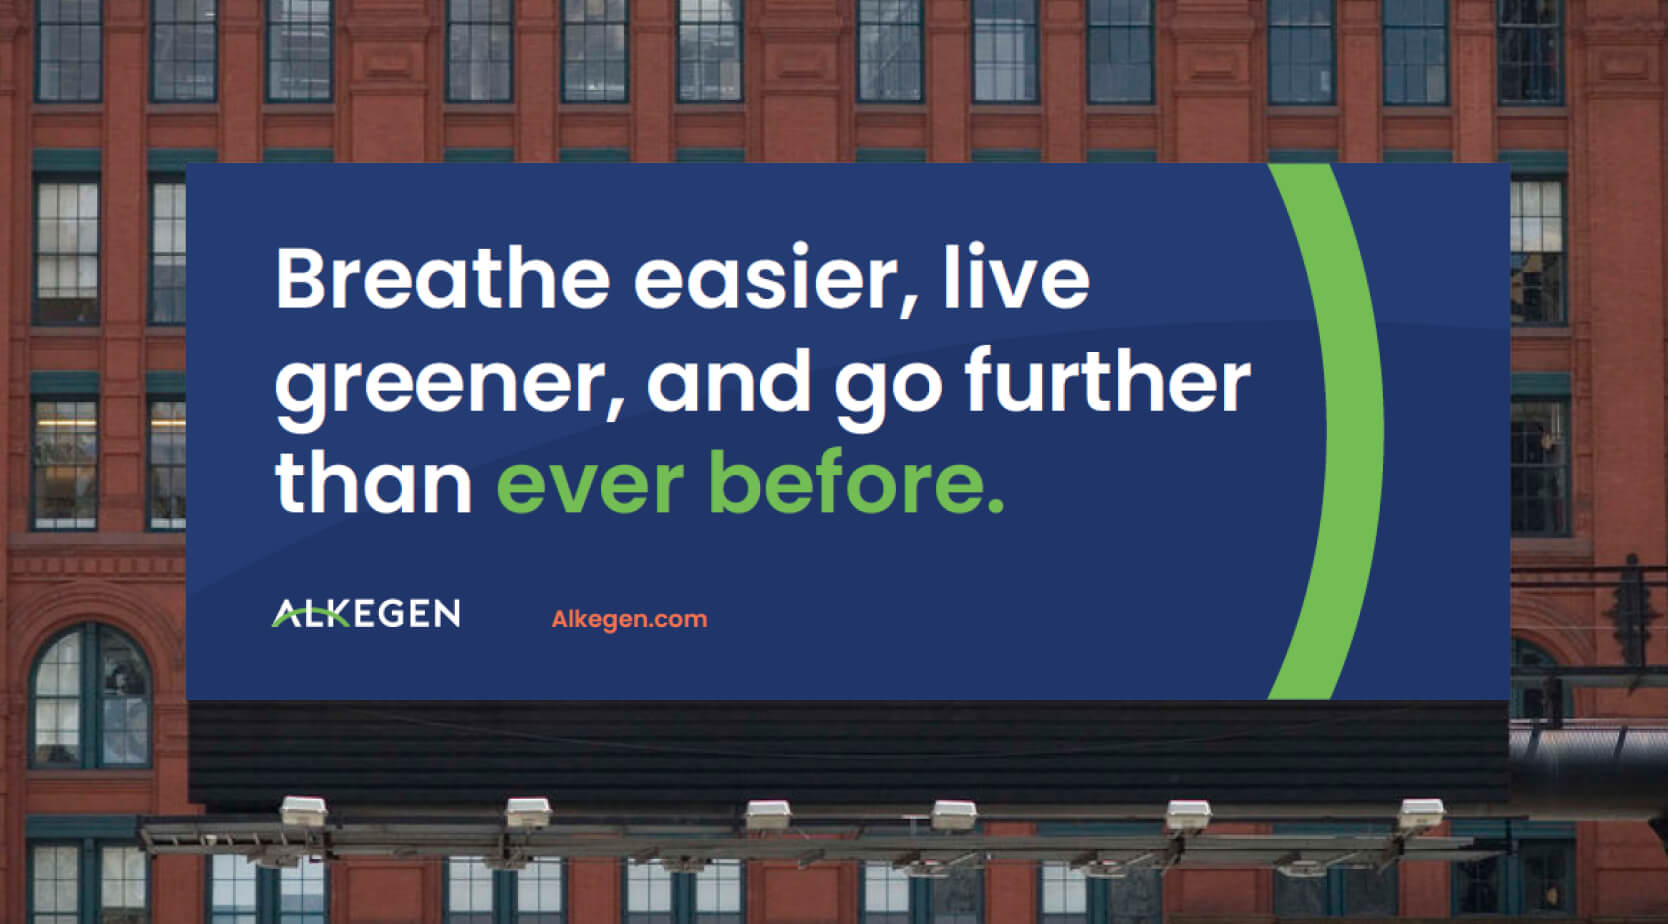 Breathe easier, live greener, and go further than ever before.